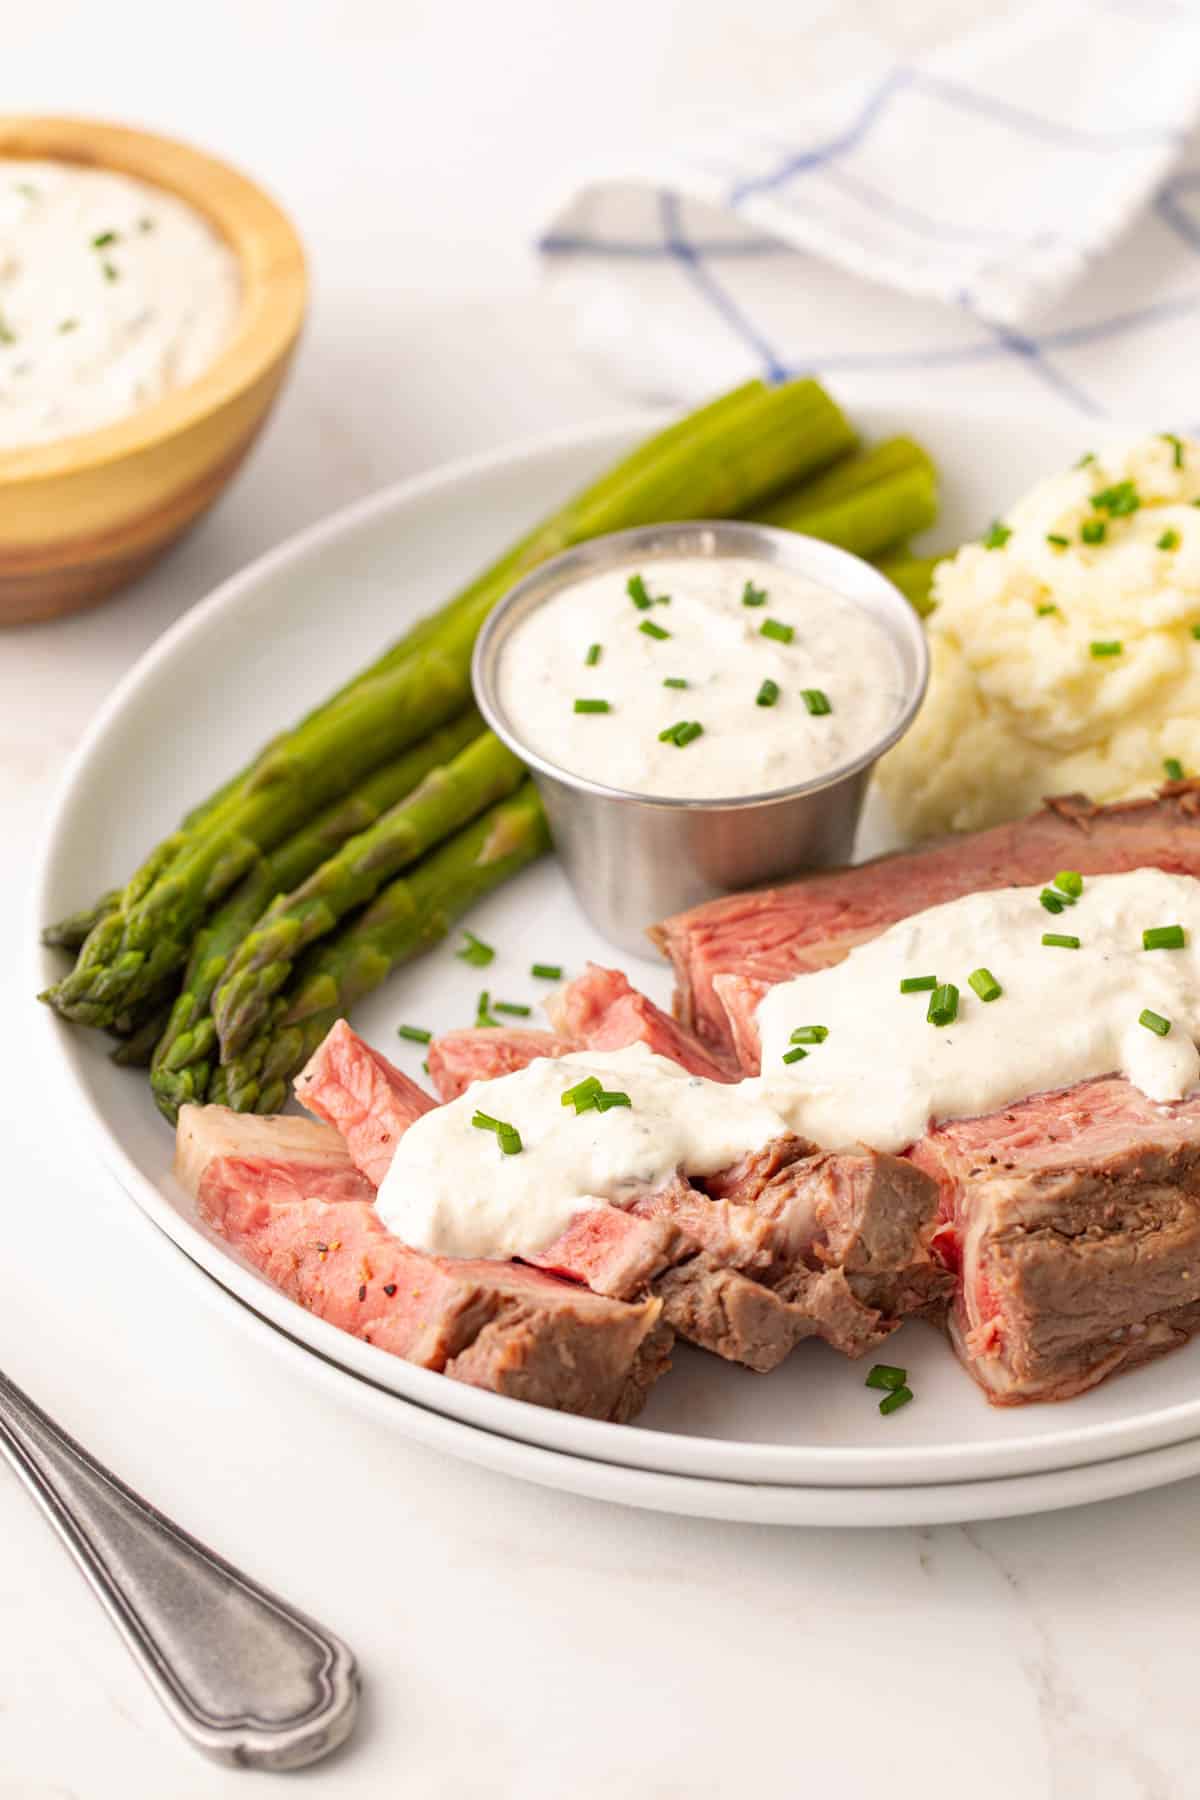 Prime rib on a white plate topped with homemade horseradish sauce.